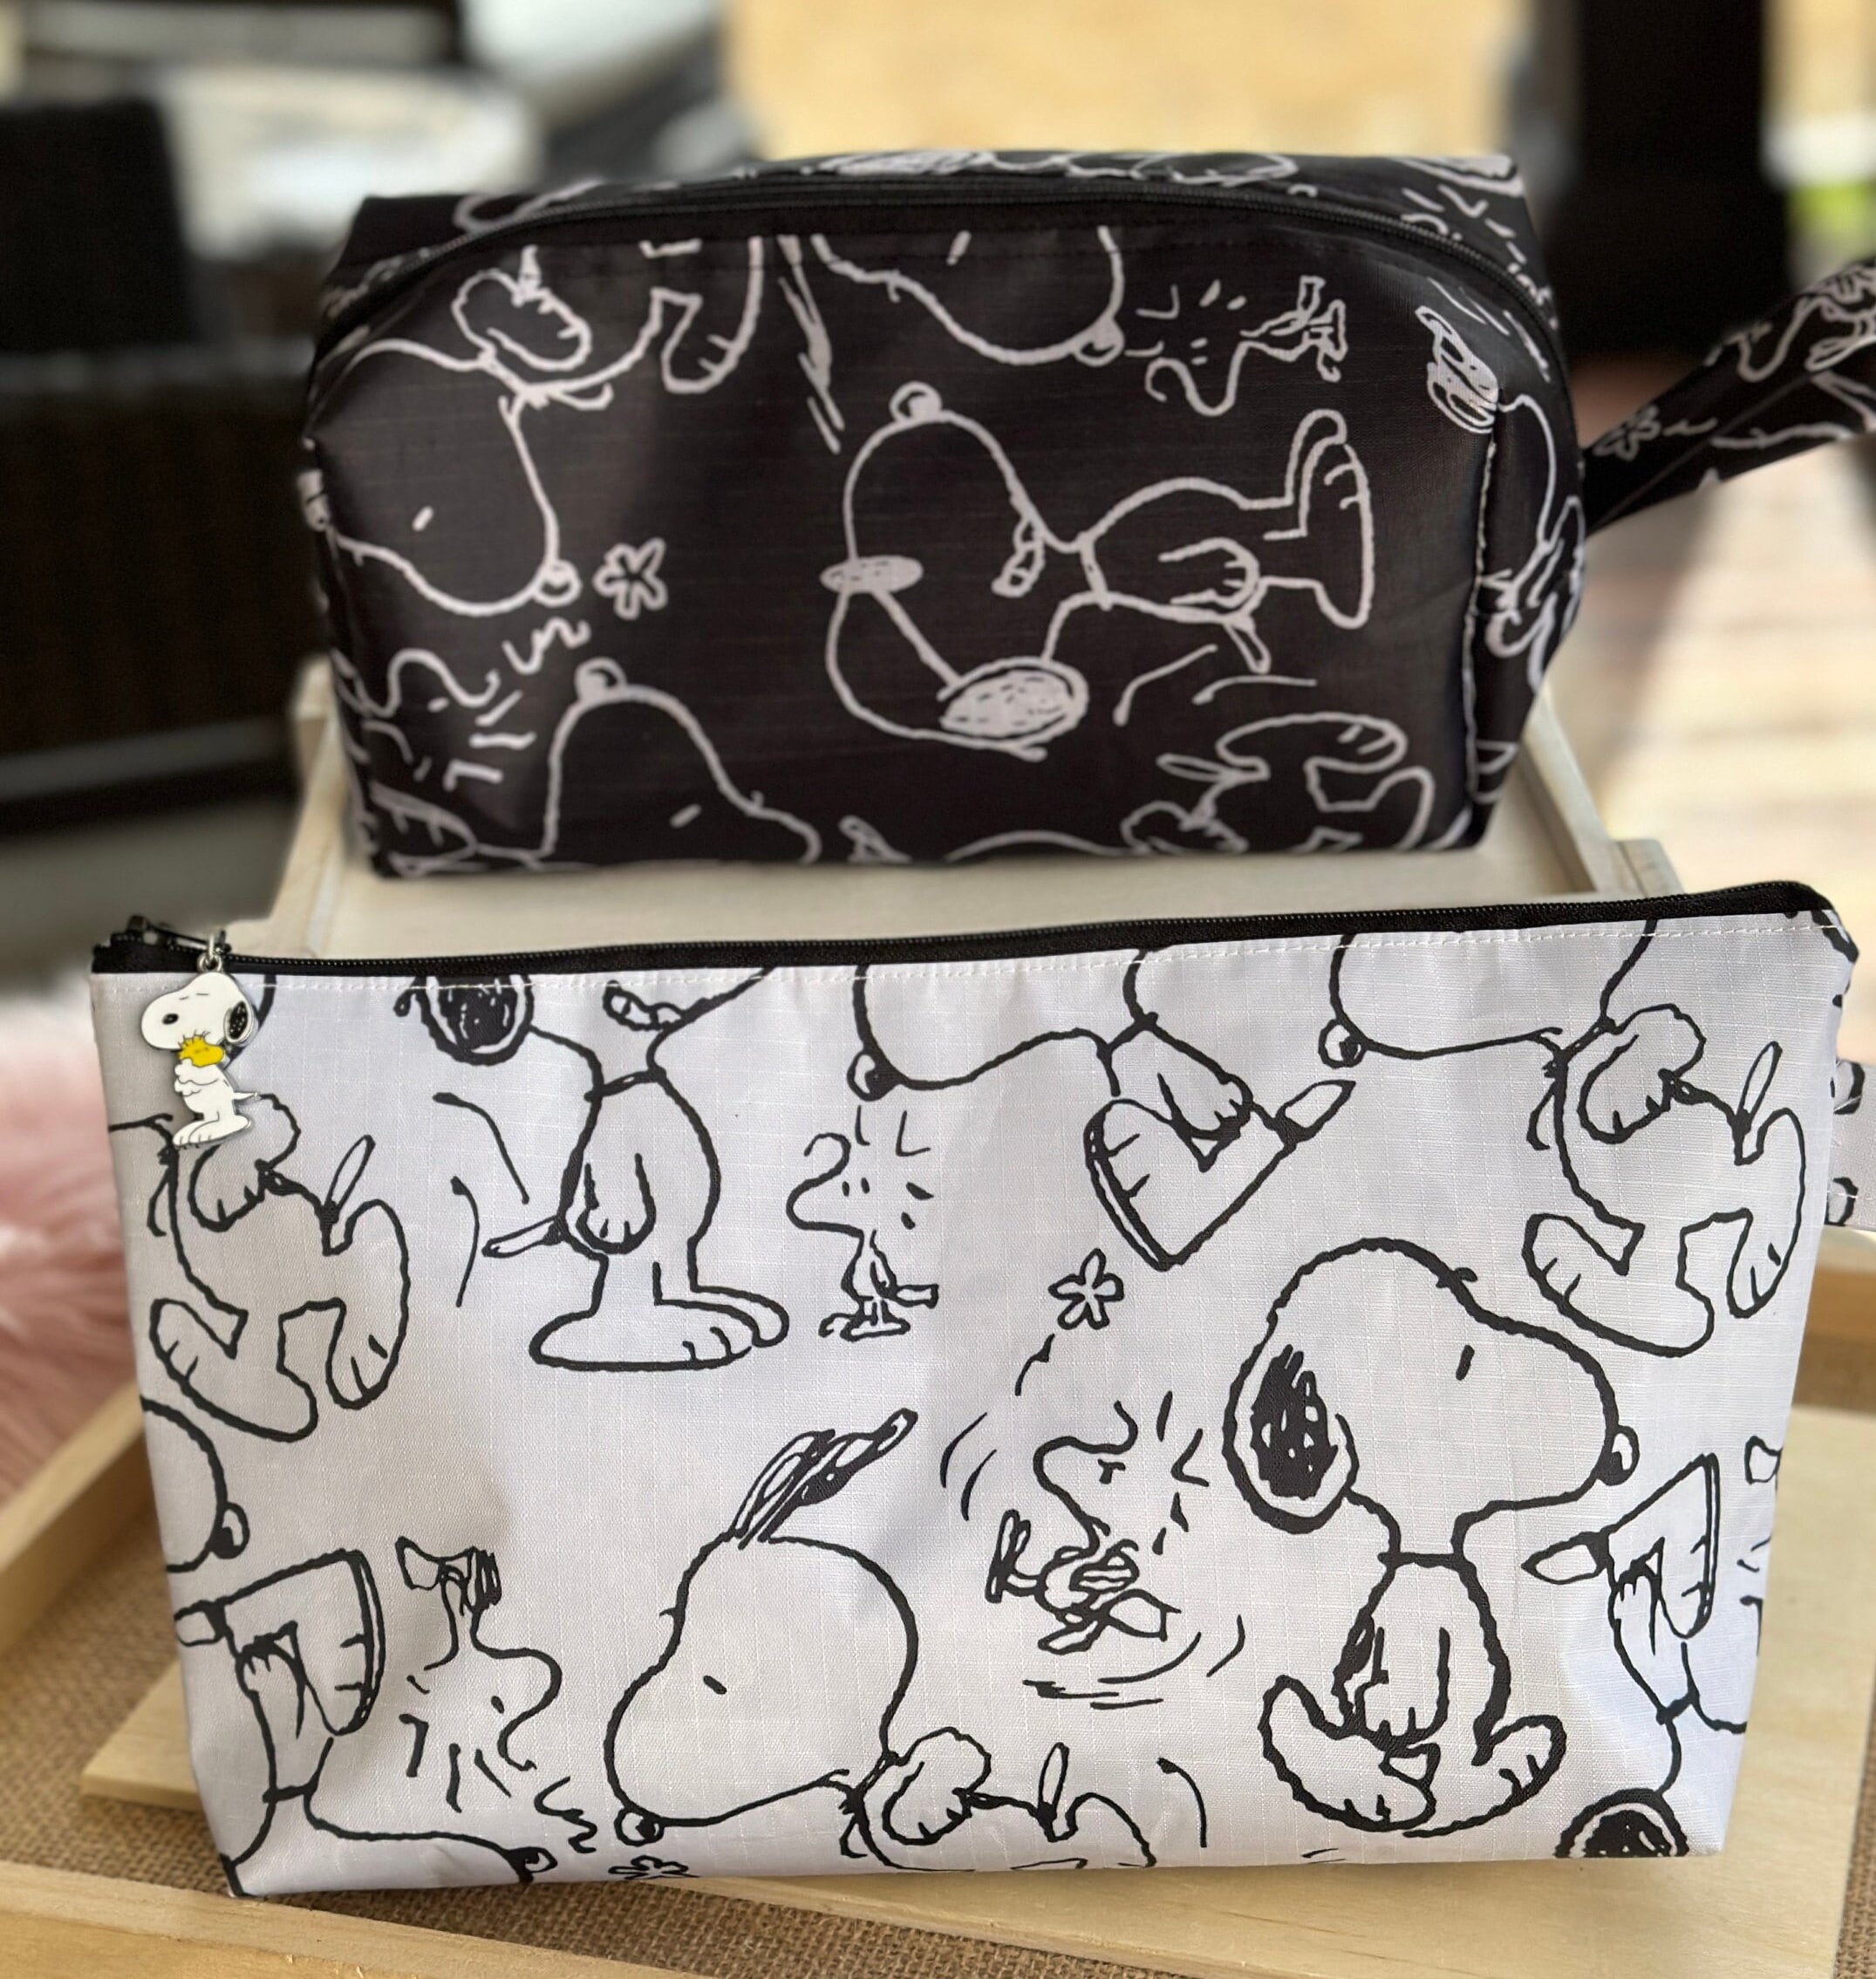 Buy Pencil case, cute, large capacity pencil case, white, pencil case,  stuffed toy, simple and stylish, Korean, cute smiling pencil case,  lightweight, multi-functional, stationery pencil case/cosmetic bag/storage  bag, perfect for students, commuters